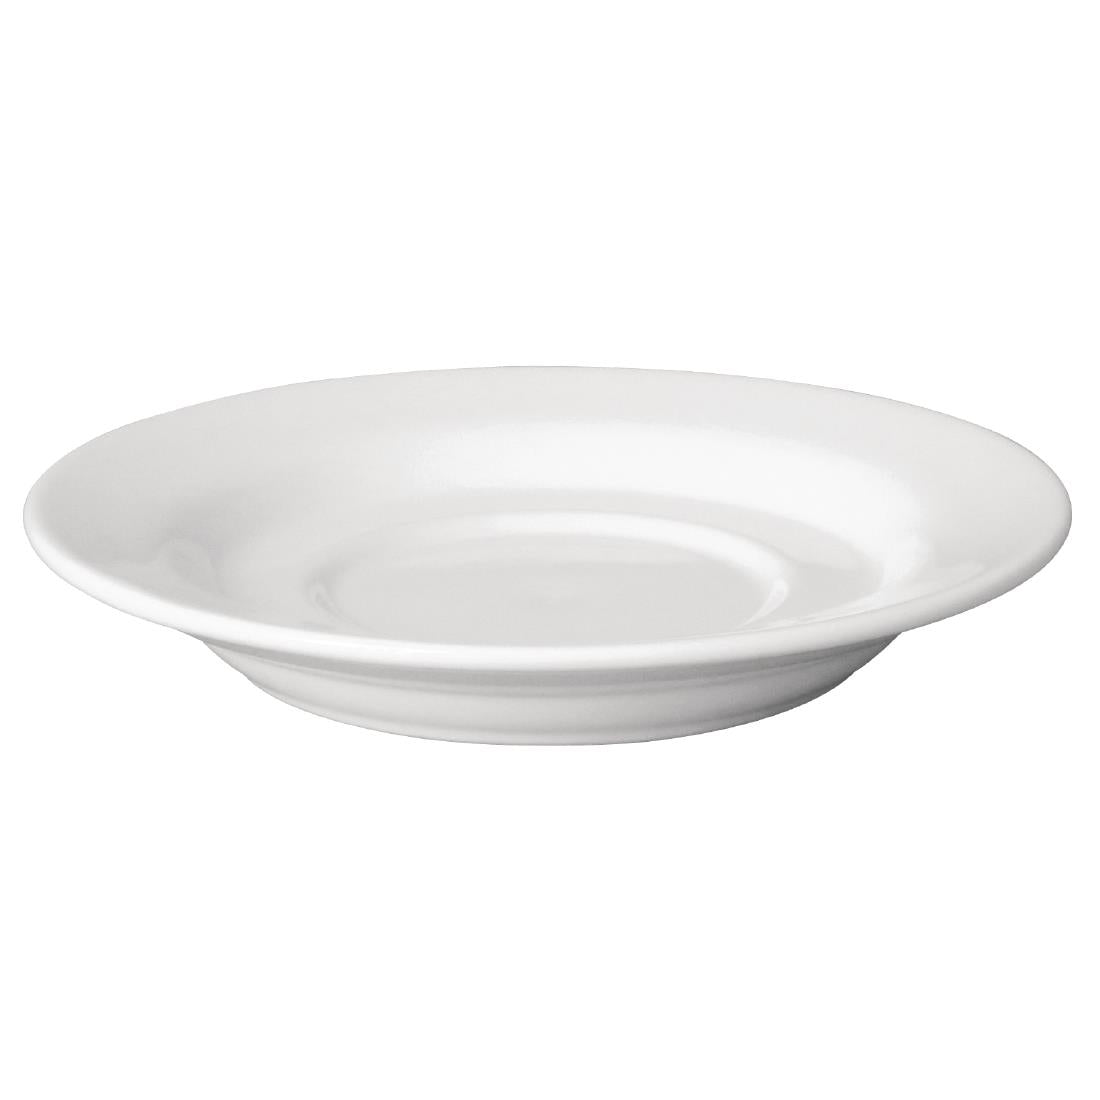 Olympia Cafe Saucers White 158mm (Pack of 12)